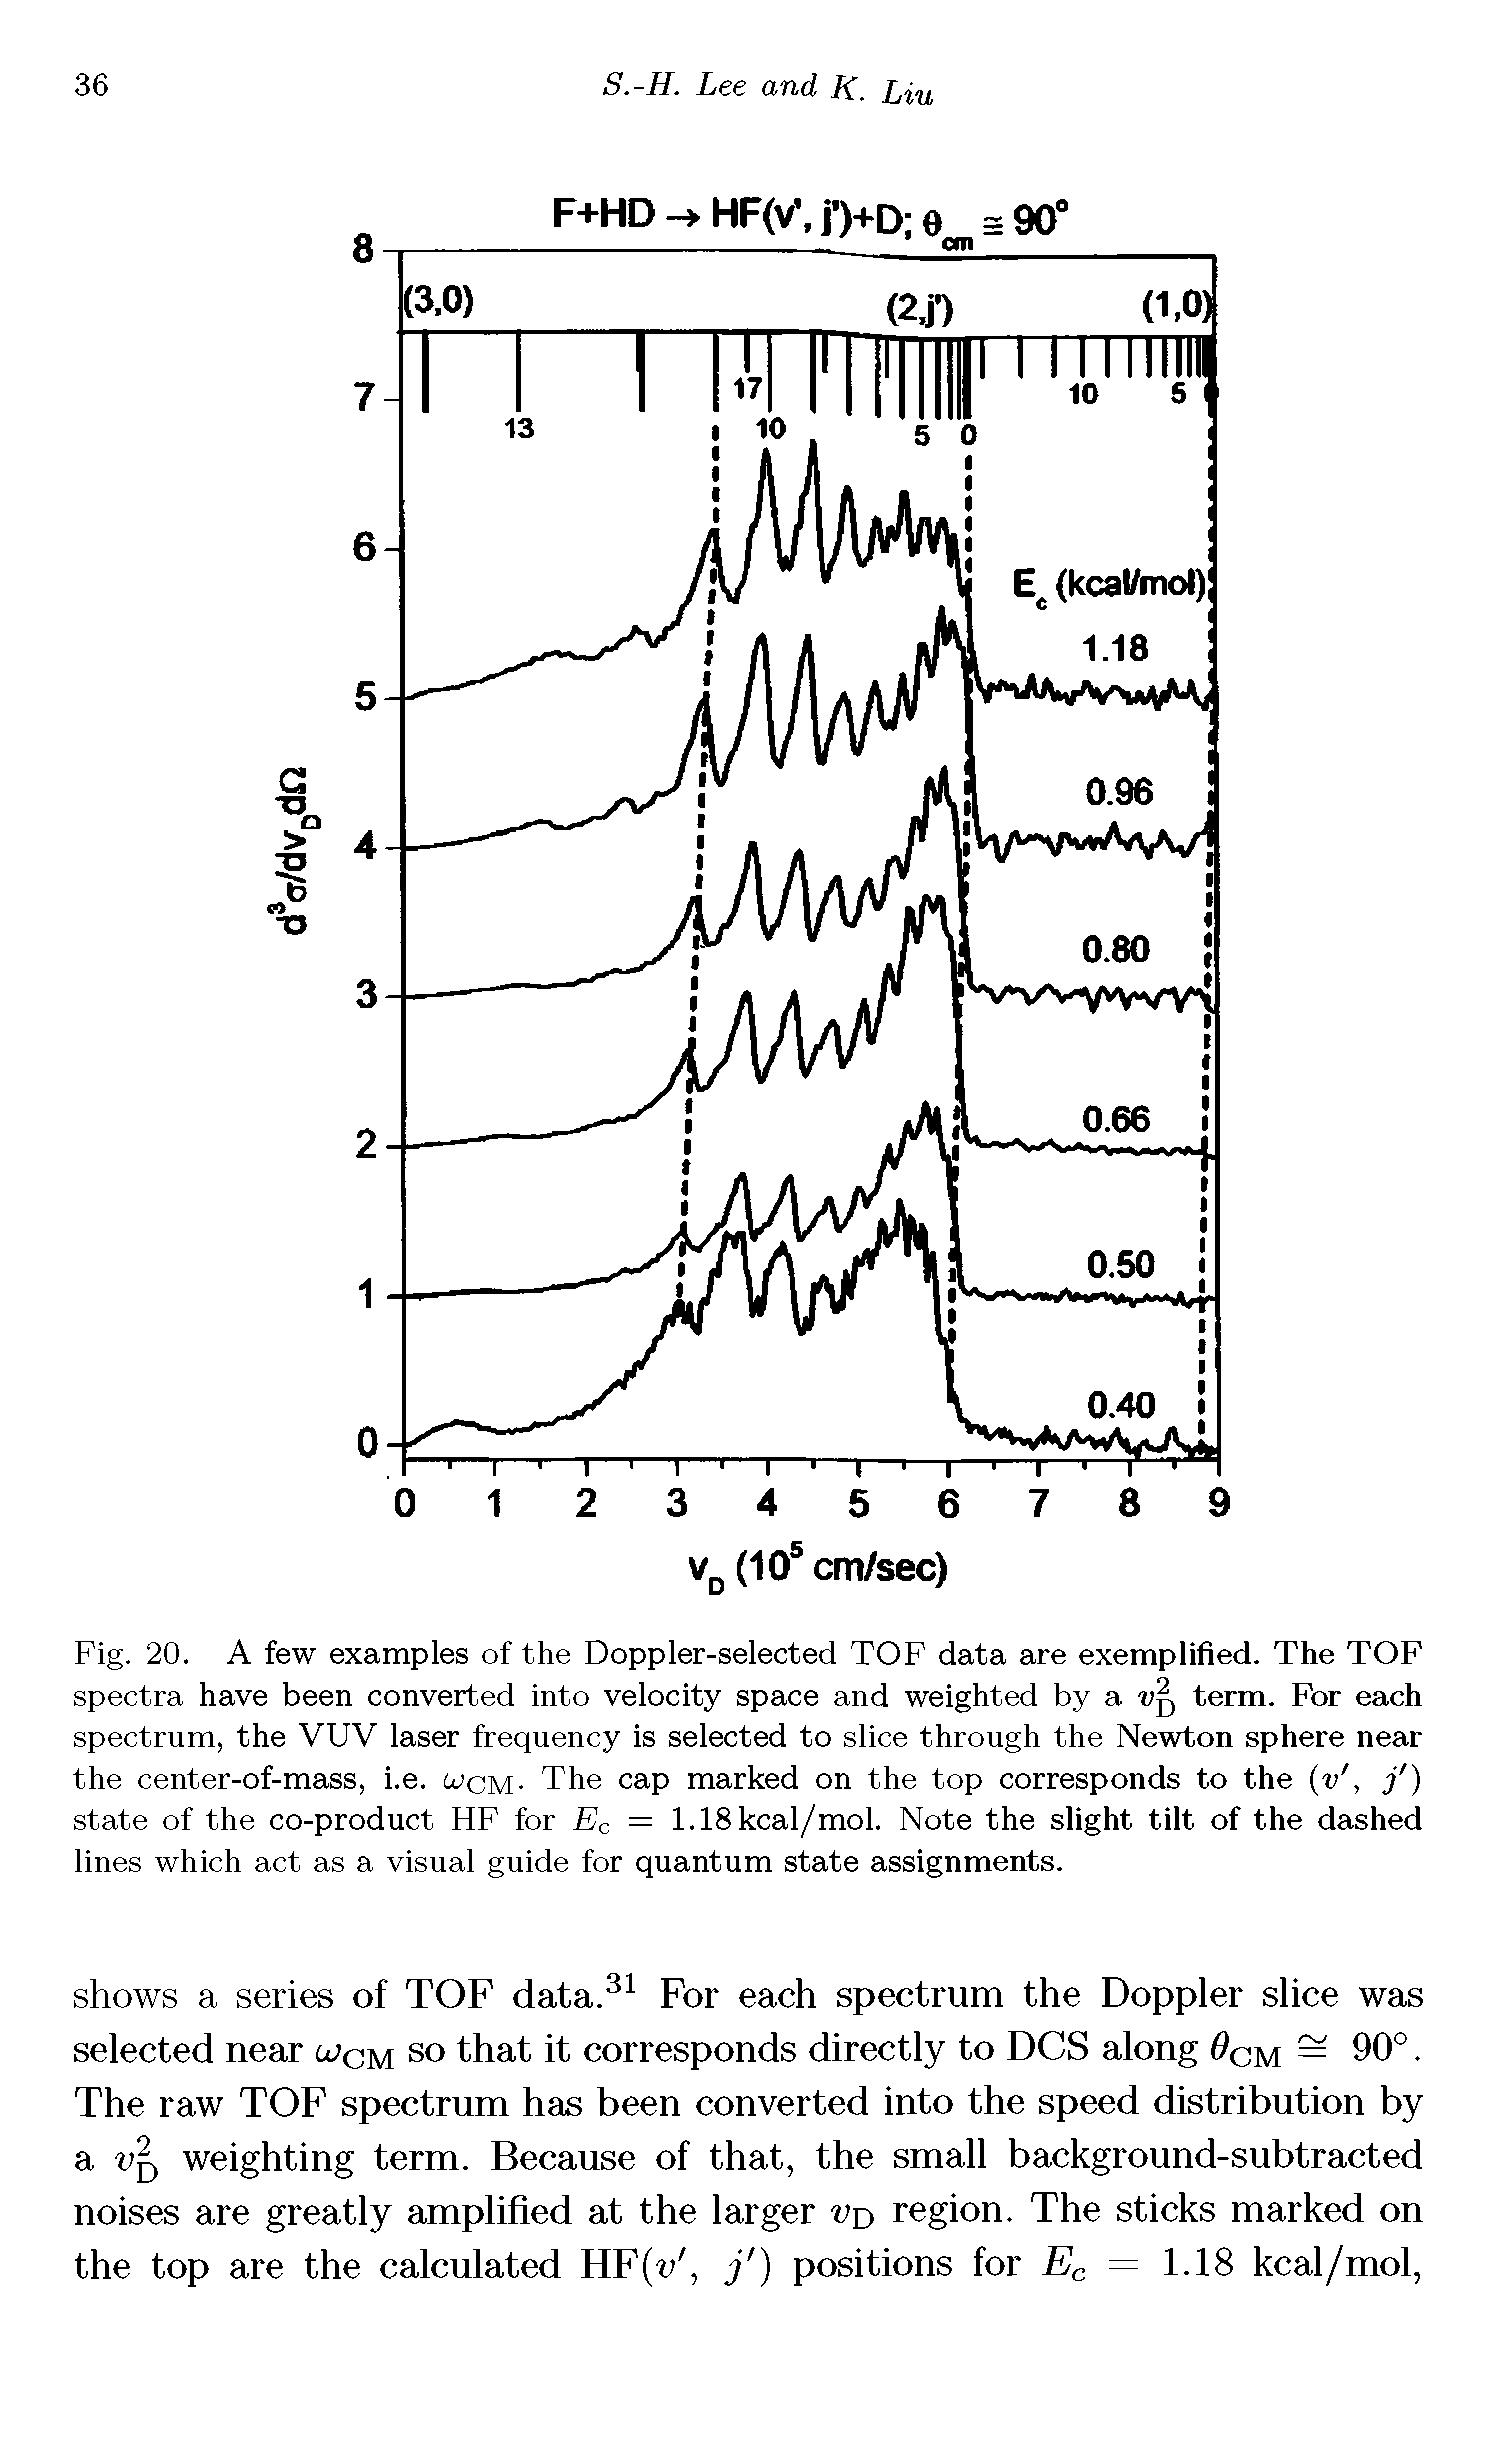 Fig. 20. A few examples of the Doppler-selected TOF data are exemplified. The TOF spectra have been converted into velocity space and weighted by a term. For each spectrum, the VUV laser frequency is selected to slice through the Newton sphere near the center-of-mass, i.e. wcm- The cap marked on the top corresponds to the (v, j ) state of the co-product F1F for Ec = 1.18kcal/mol. Note the slight tilt of the dashed lines which act as a visual guide for quantum state assignments.